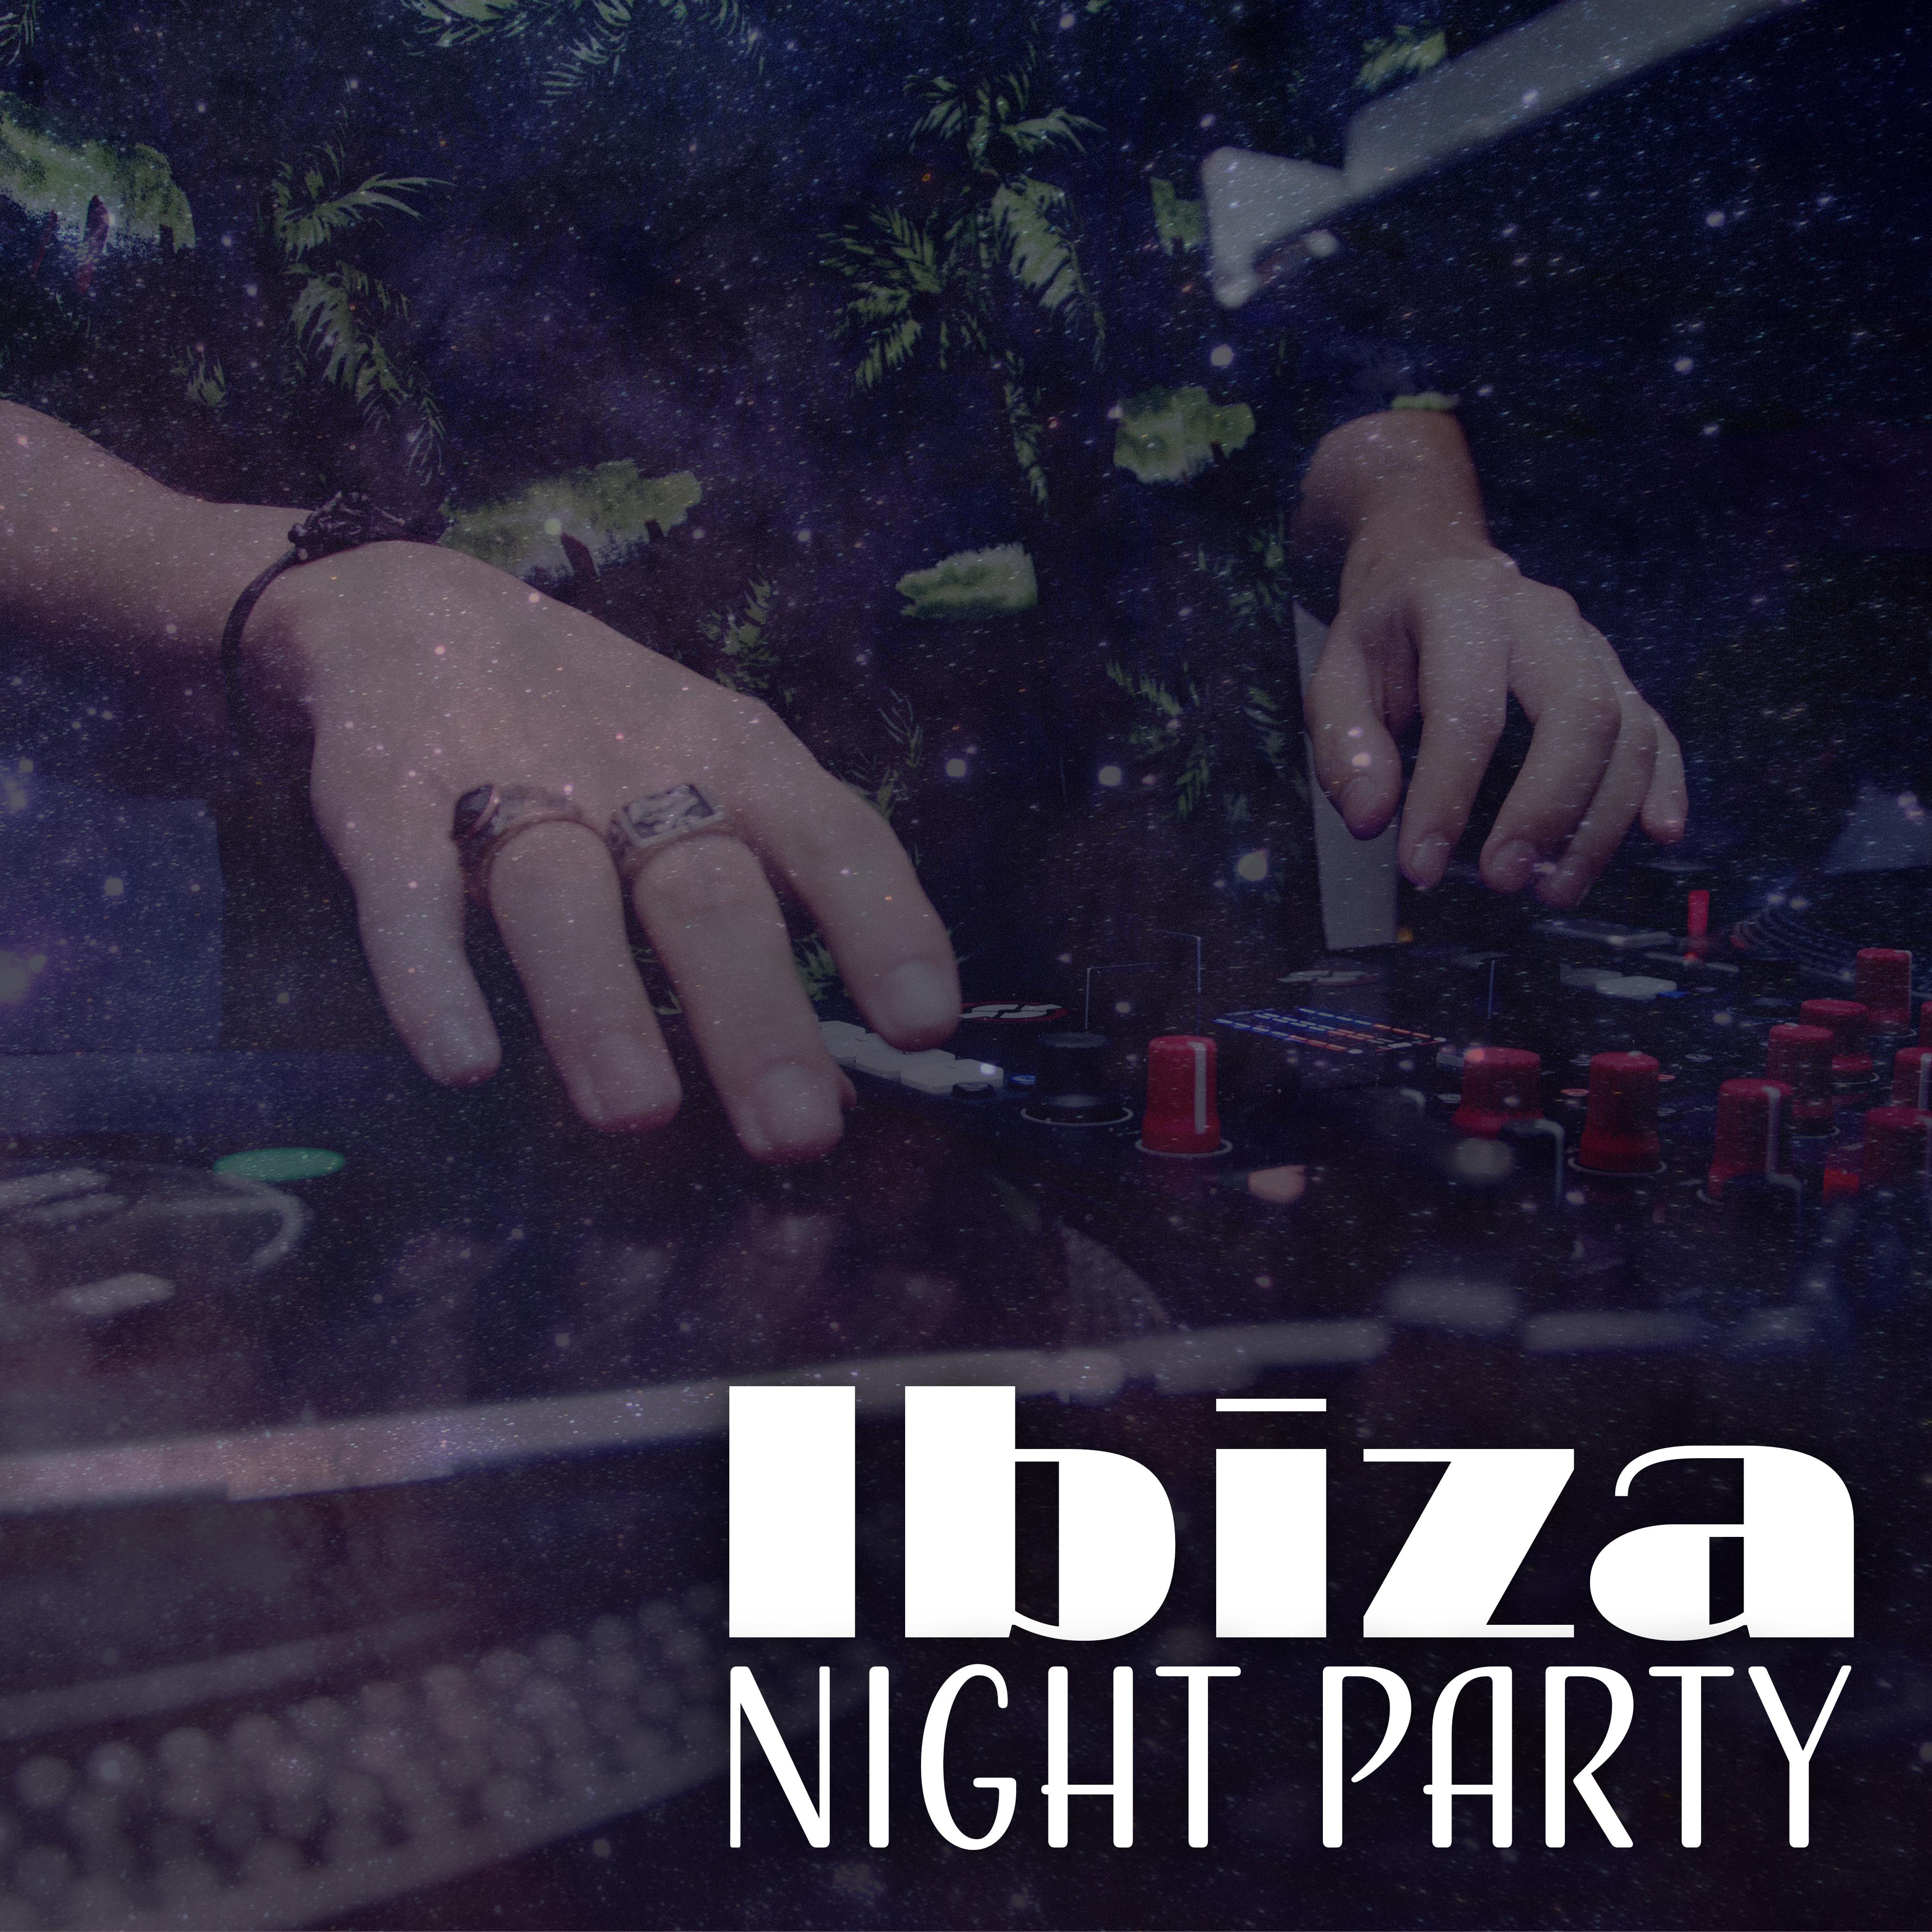 Ibiza Night Party  Chill Out to Dance, Party Hits 2017, Summertime, Relax